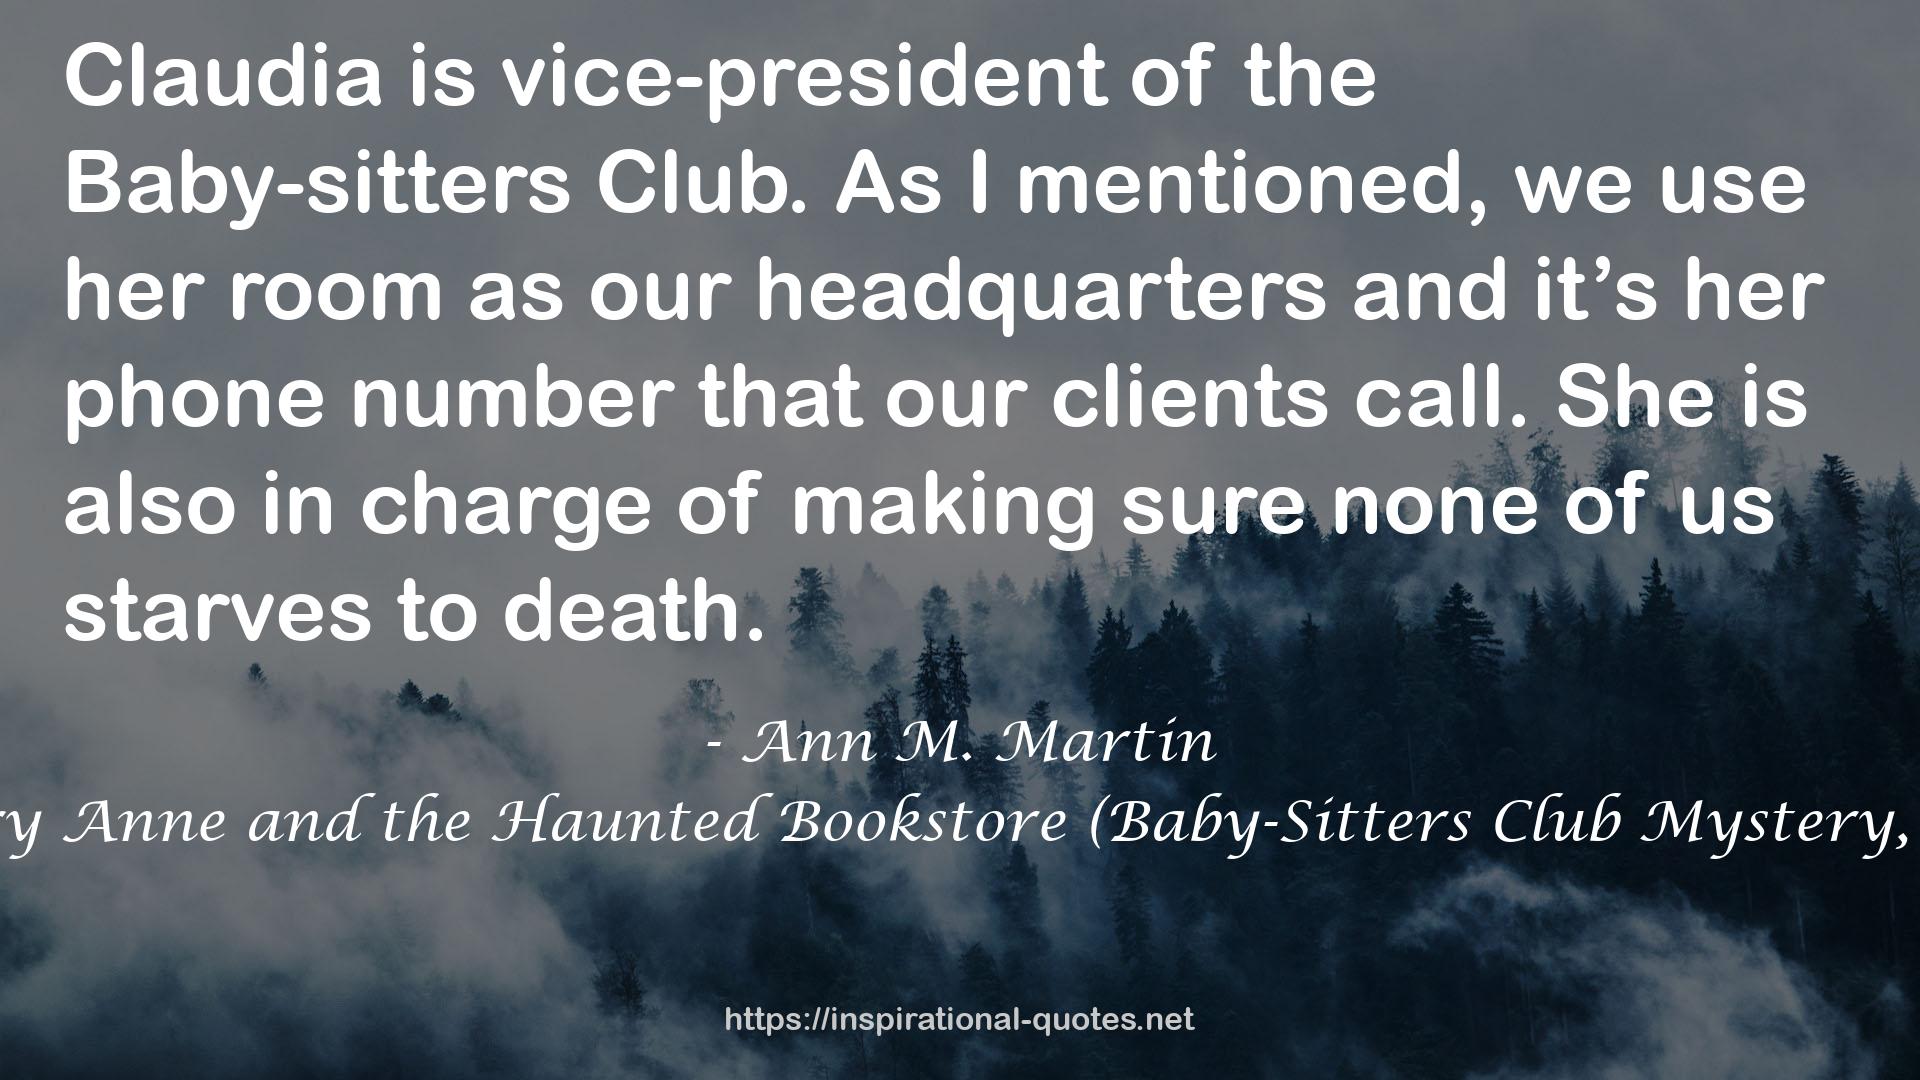 Mary Anne and the Haunted Bookstore (Baby-Sitters Club Mystery, #34) QUOTES